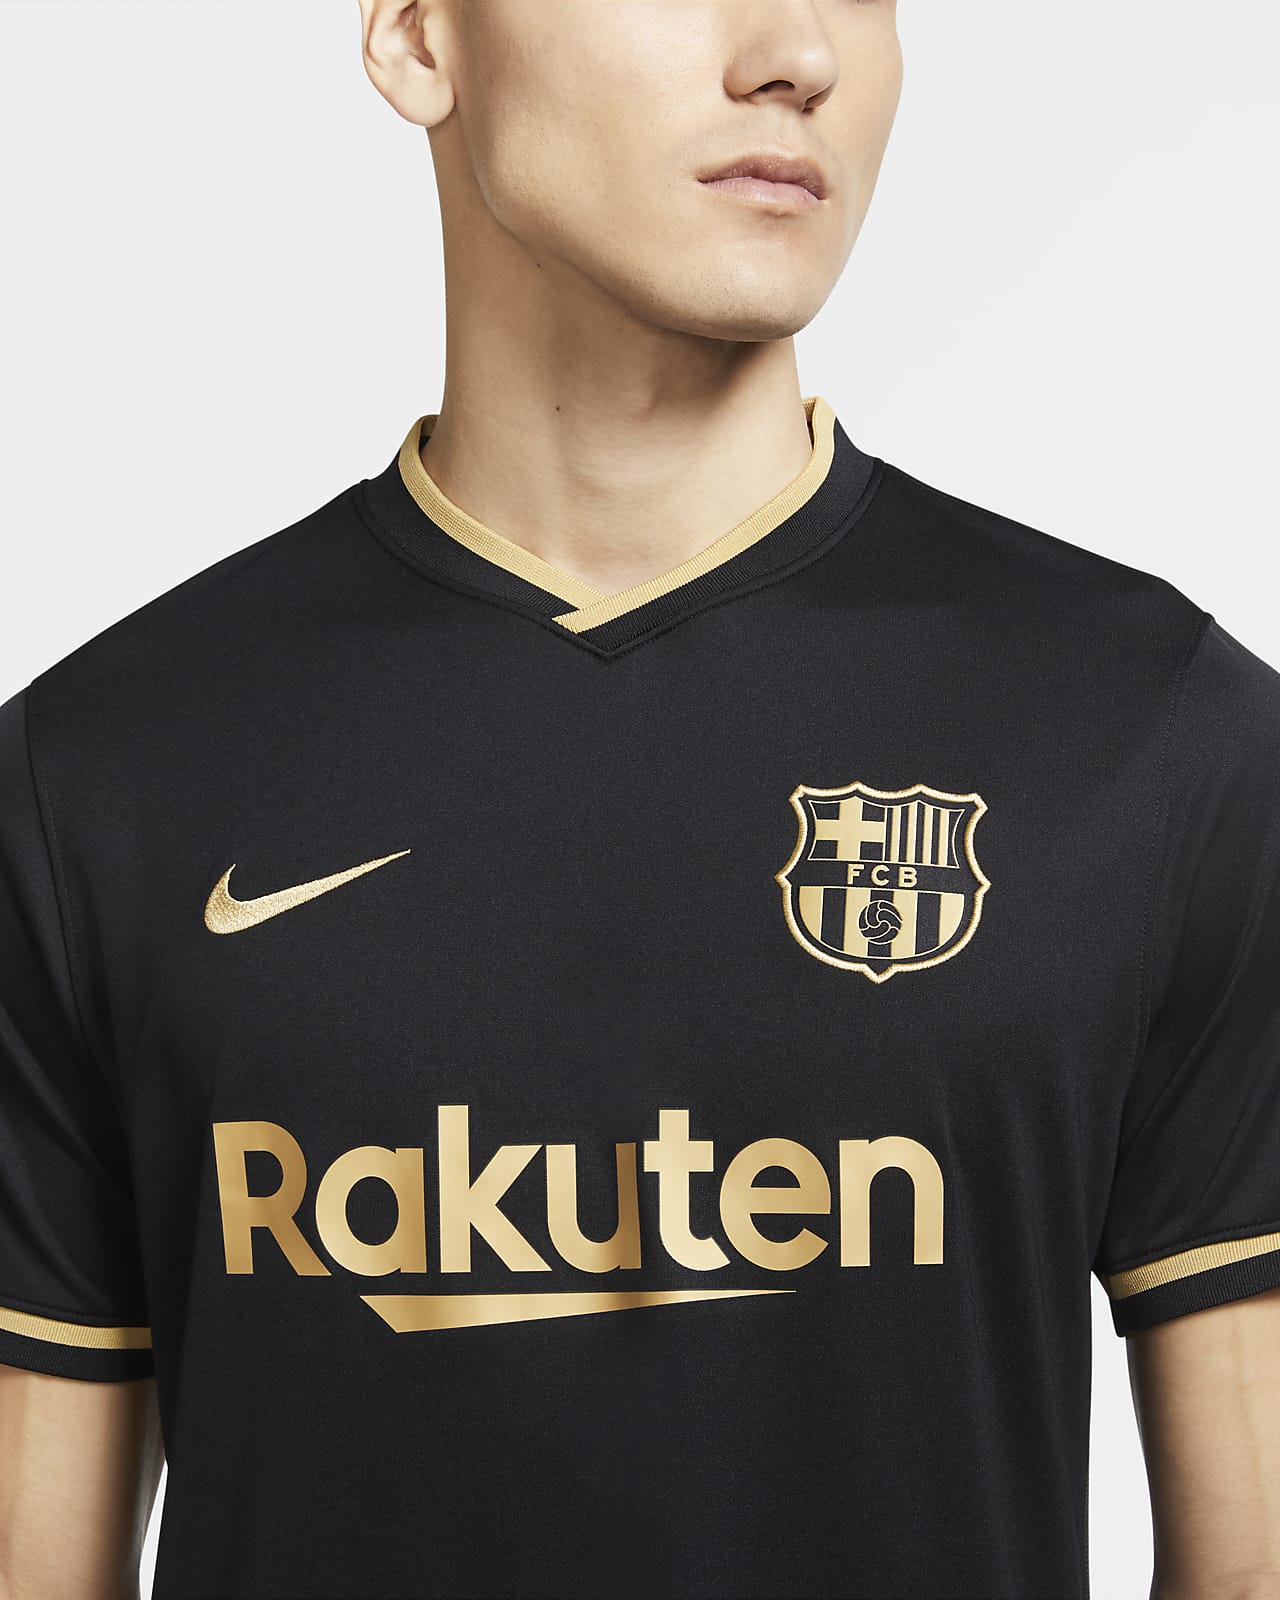 black and gold nike soccer jersey